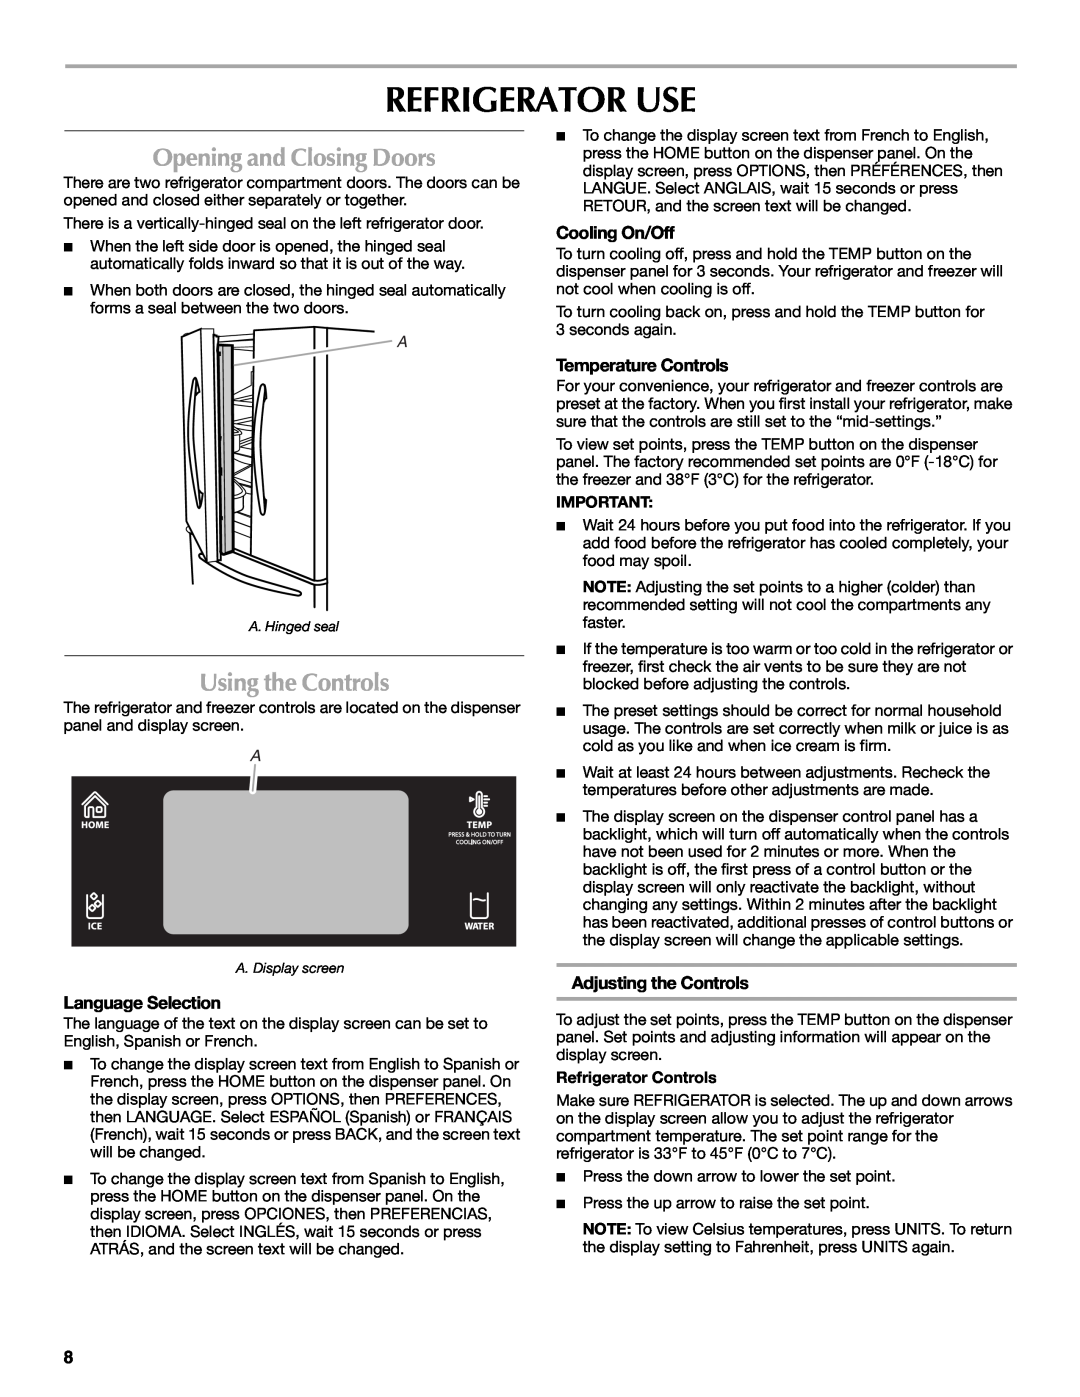 Maytag MFT2771WEM Refrigerator Use, Opening and Closing Doors, Using the Controls, Language Selection, Cooling On/Off 